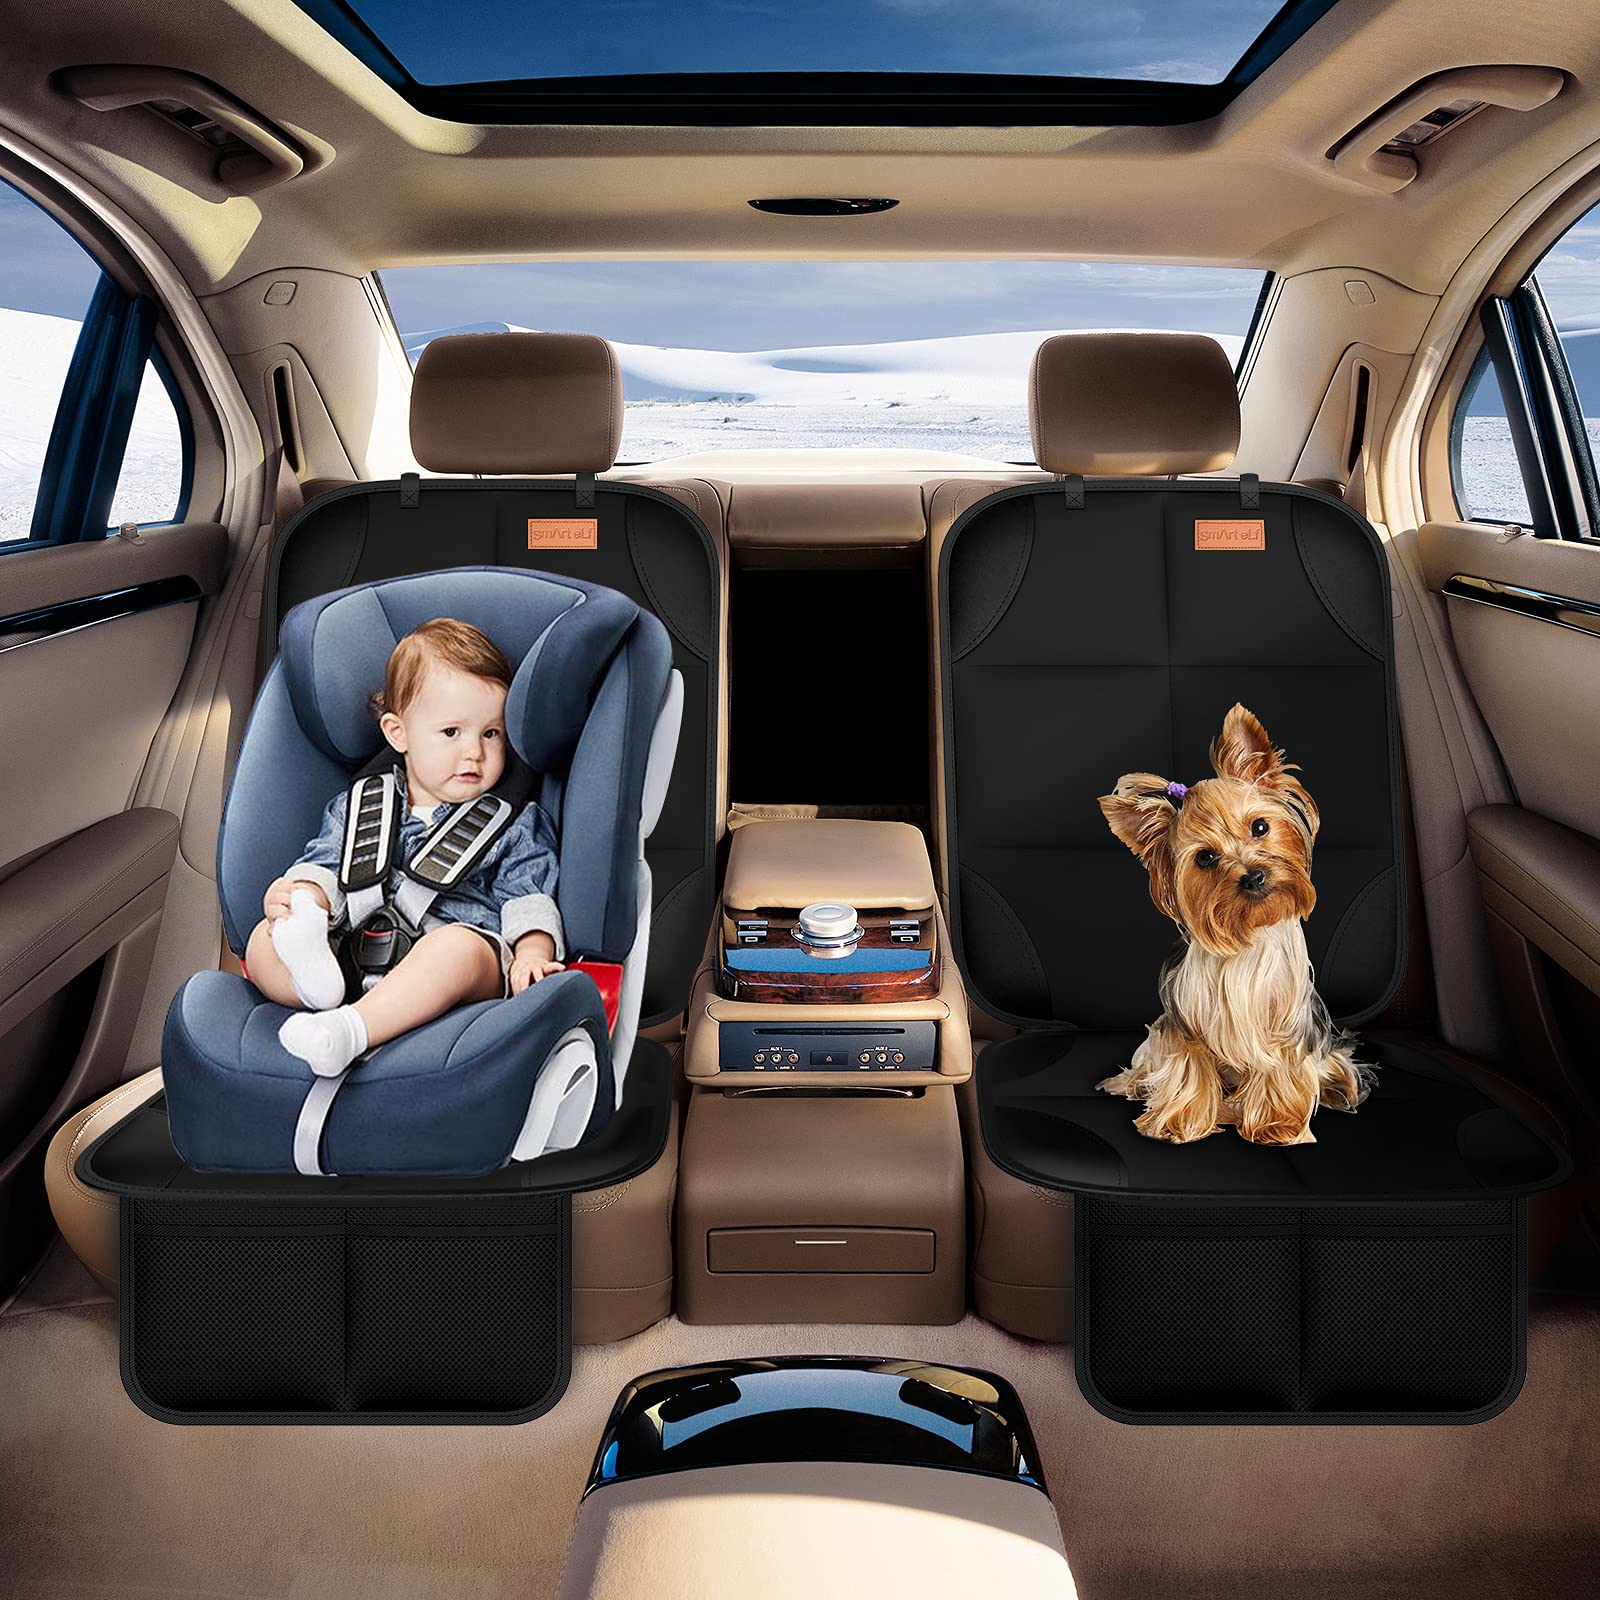 Smart eLf 1680D Material Child Seat Protection Mat, Anti-Slip, Waterproof, Car Seat Protector, Seat Protector (Set of 2), Car Accessories, Storage, Pockets, etc